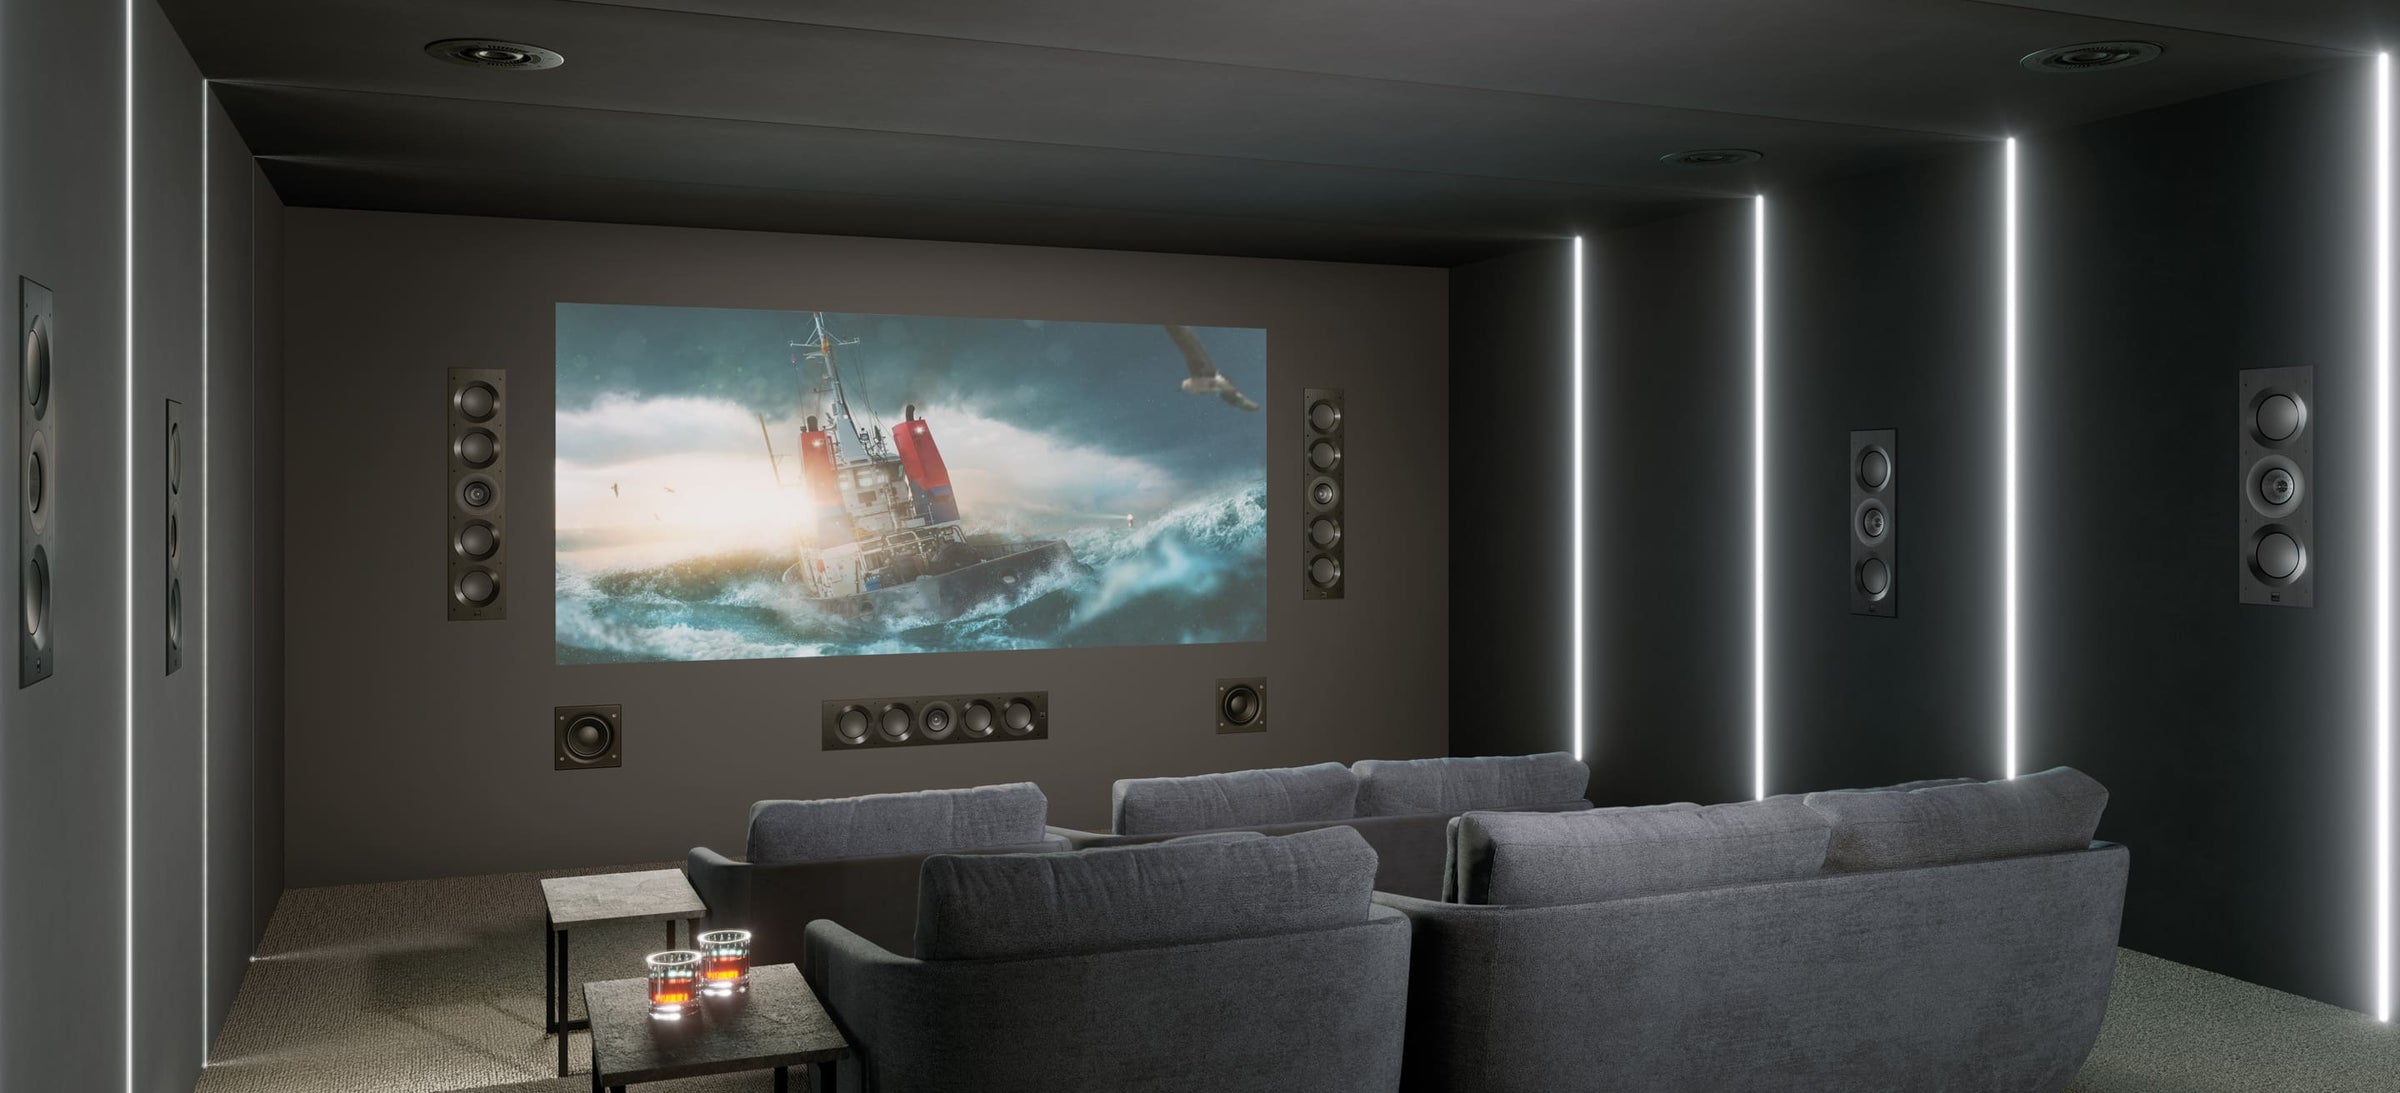 Home Cinema Speakers Systems Guide